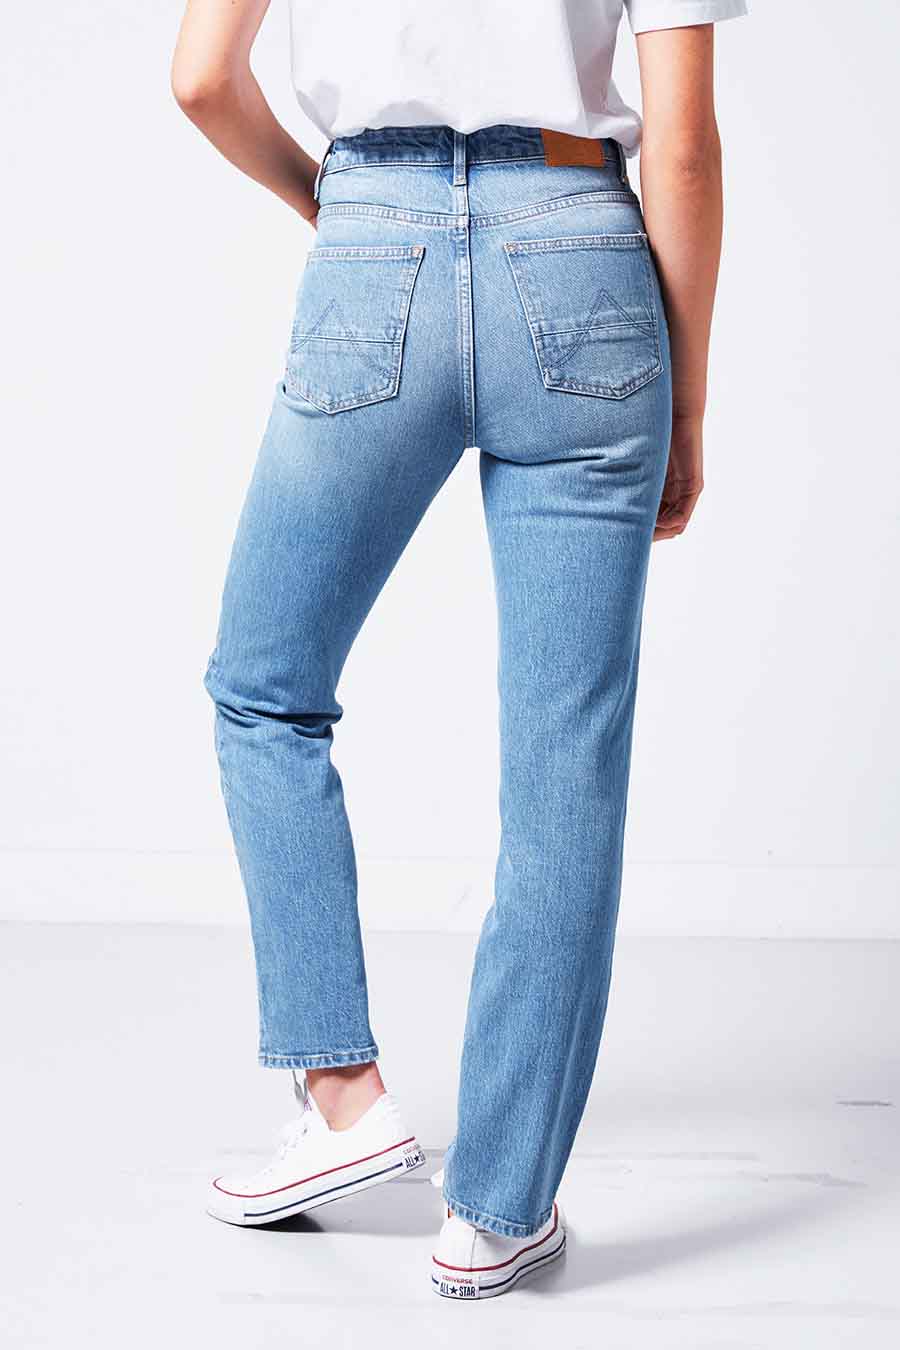 Women's jeans fit guide | America Today